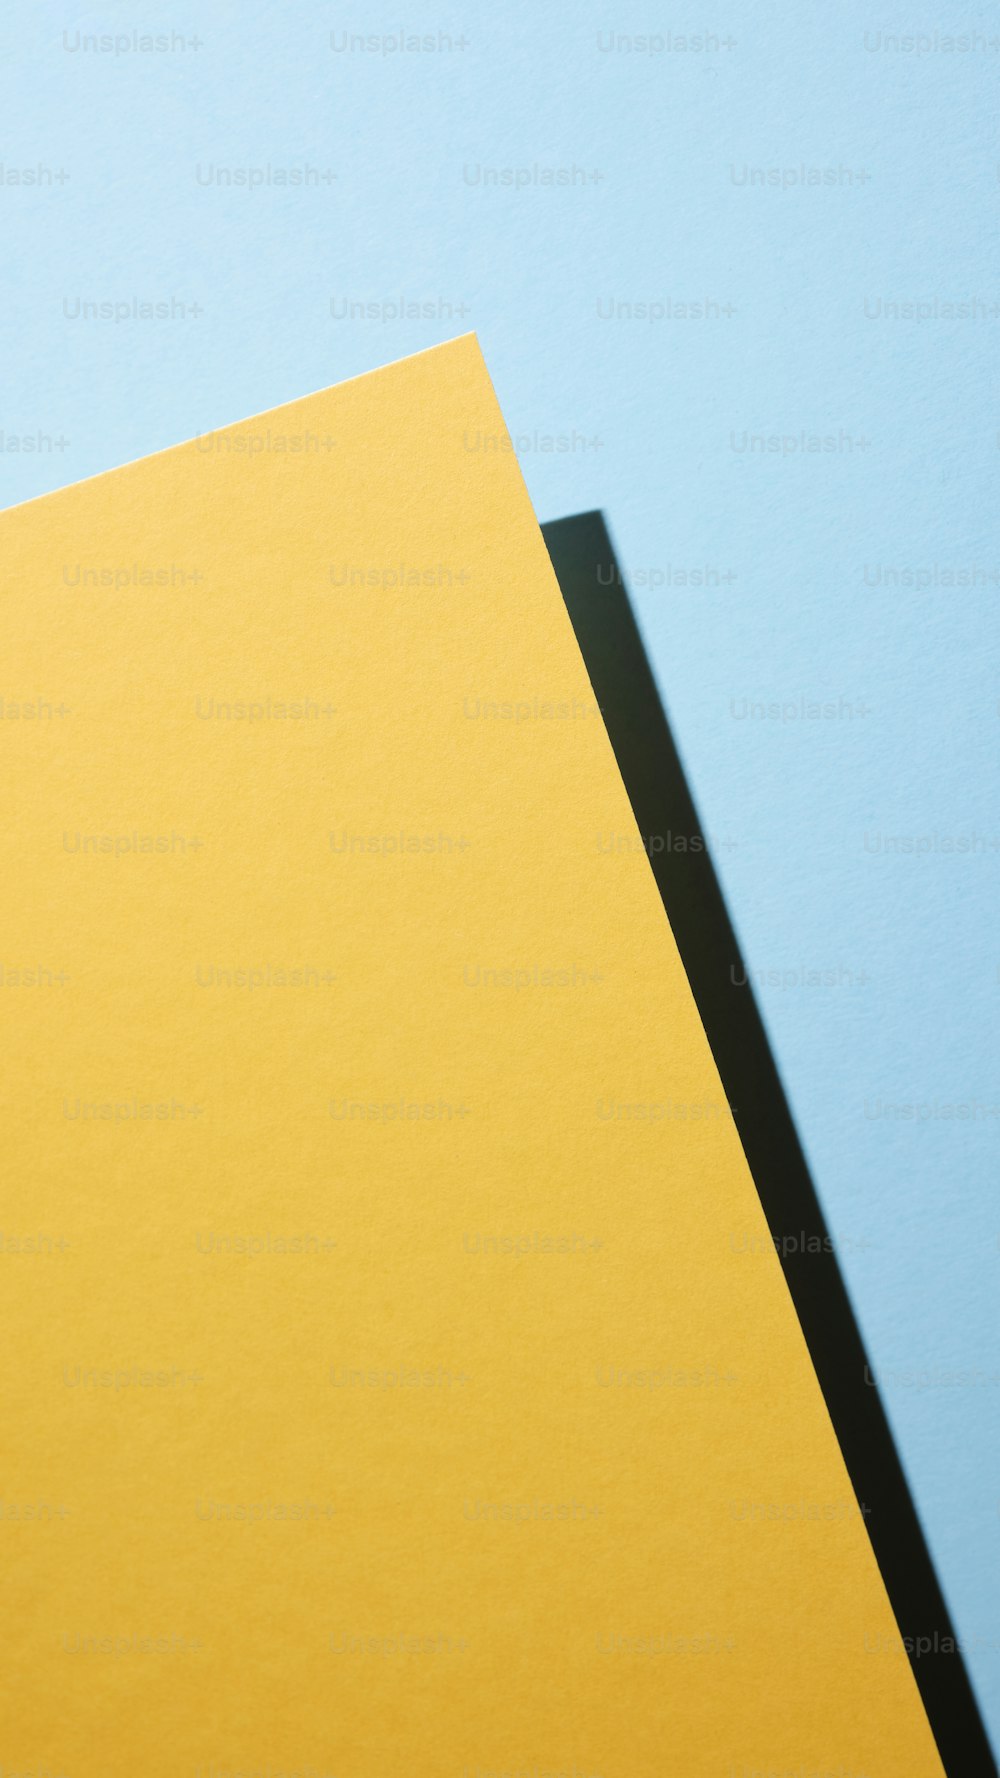 a yellow piece of paper on a blue background